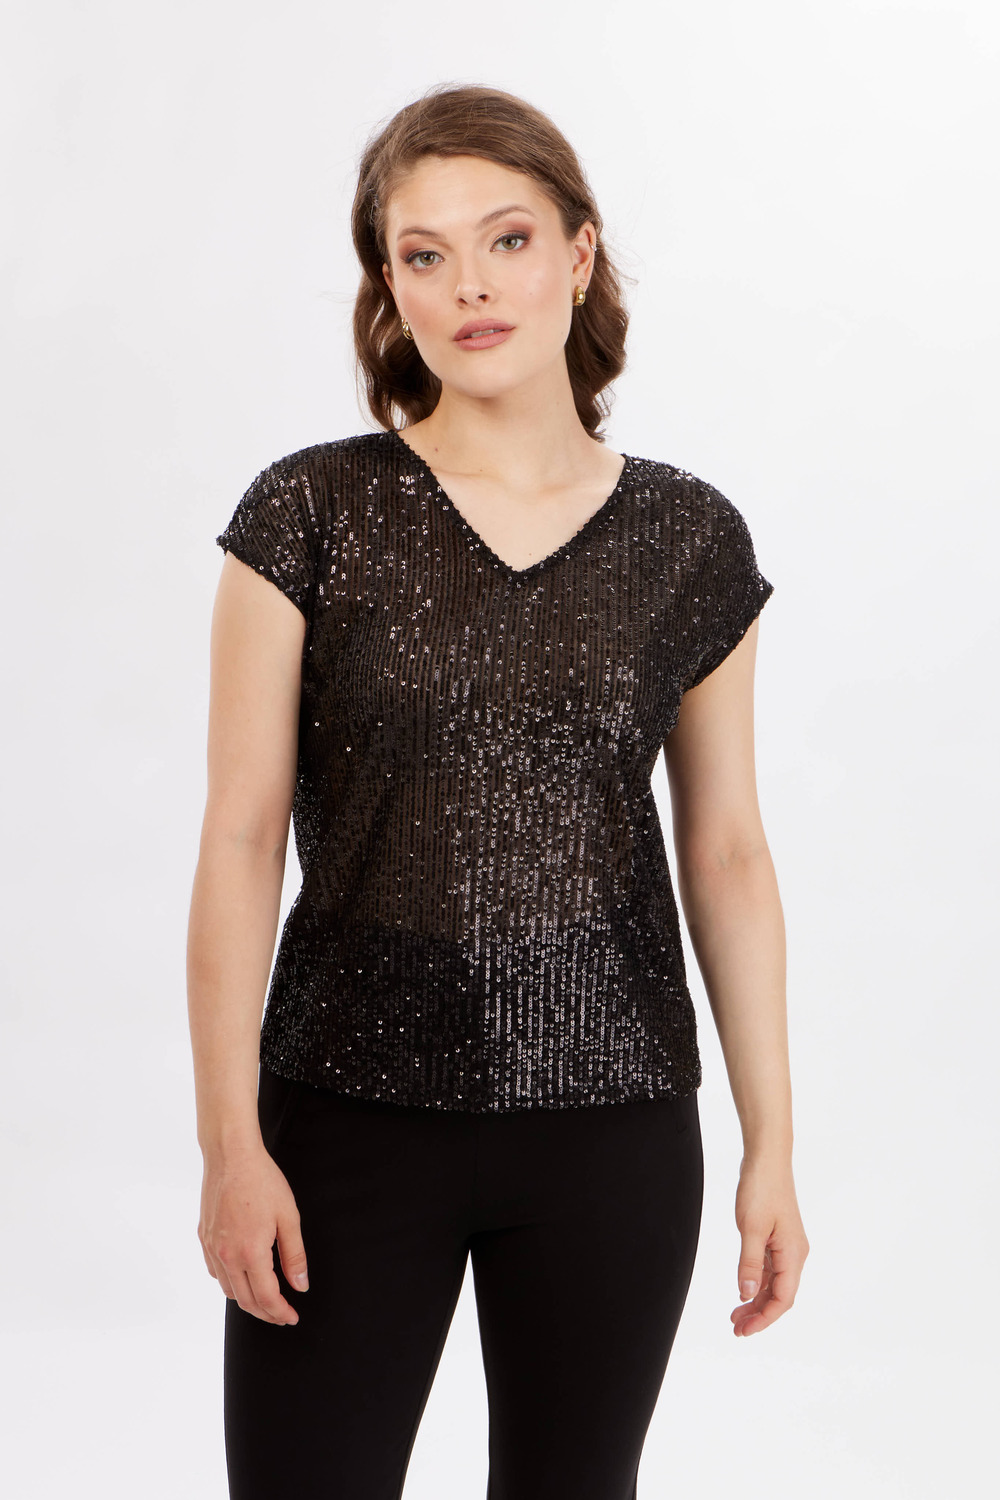 Knit Sequin Short Sleeve Top Style 234249. Black